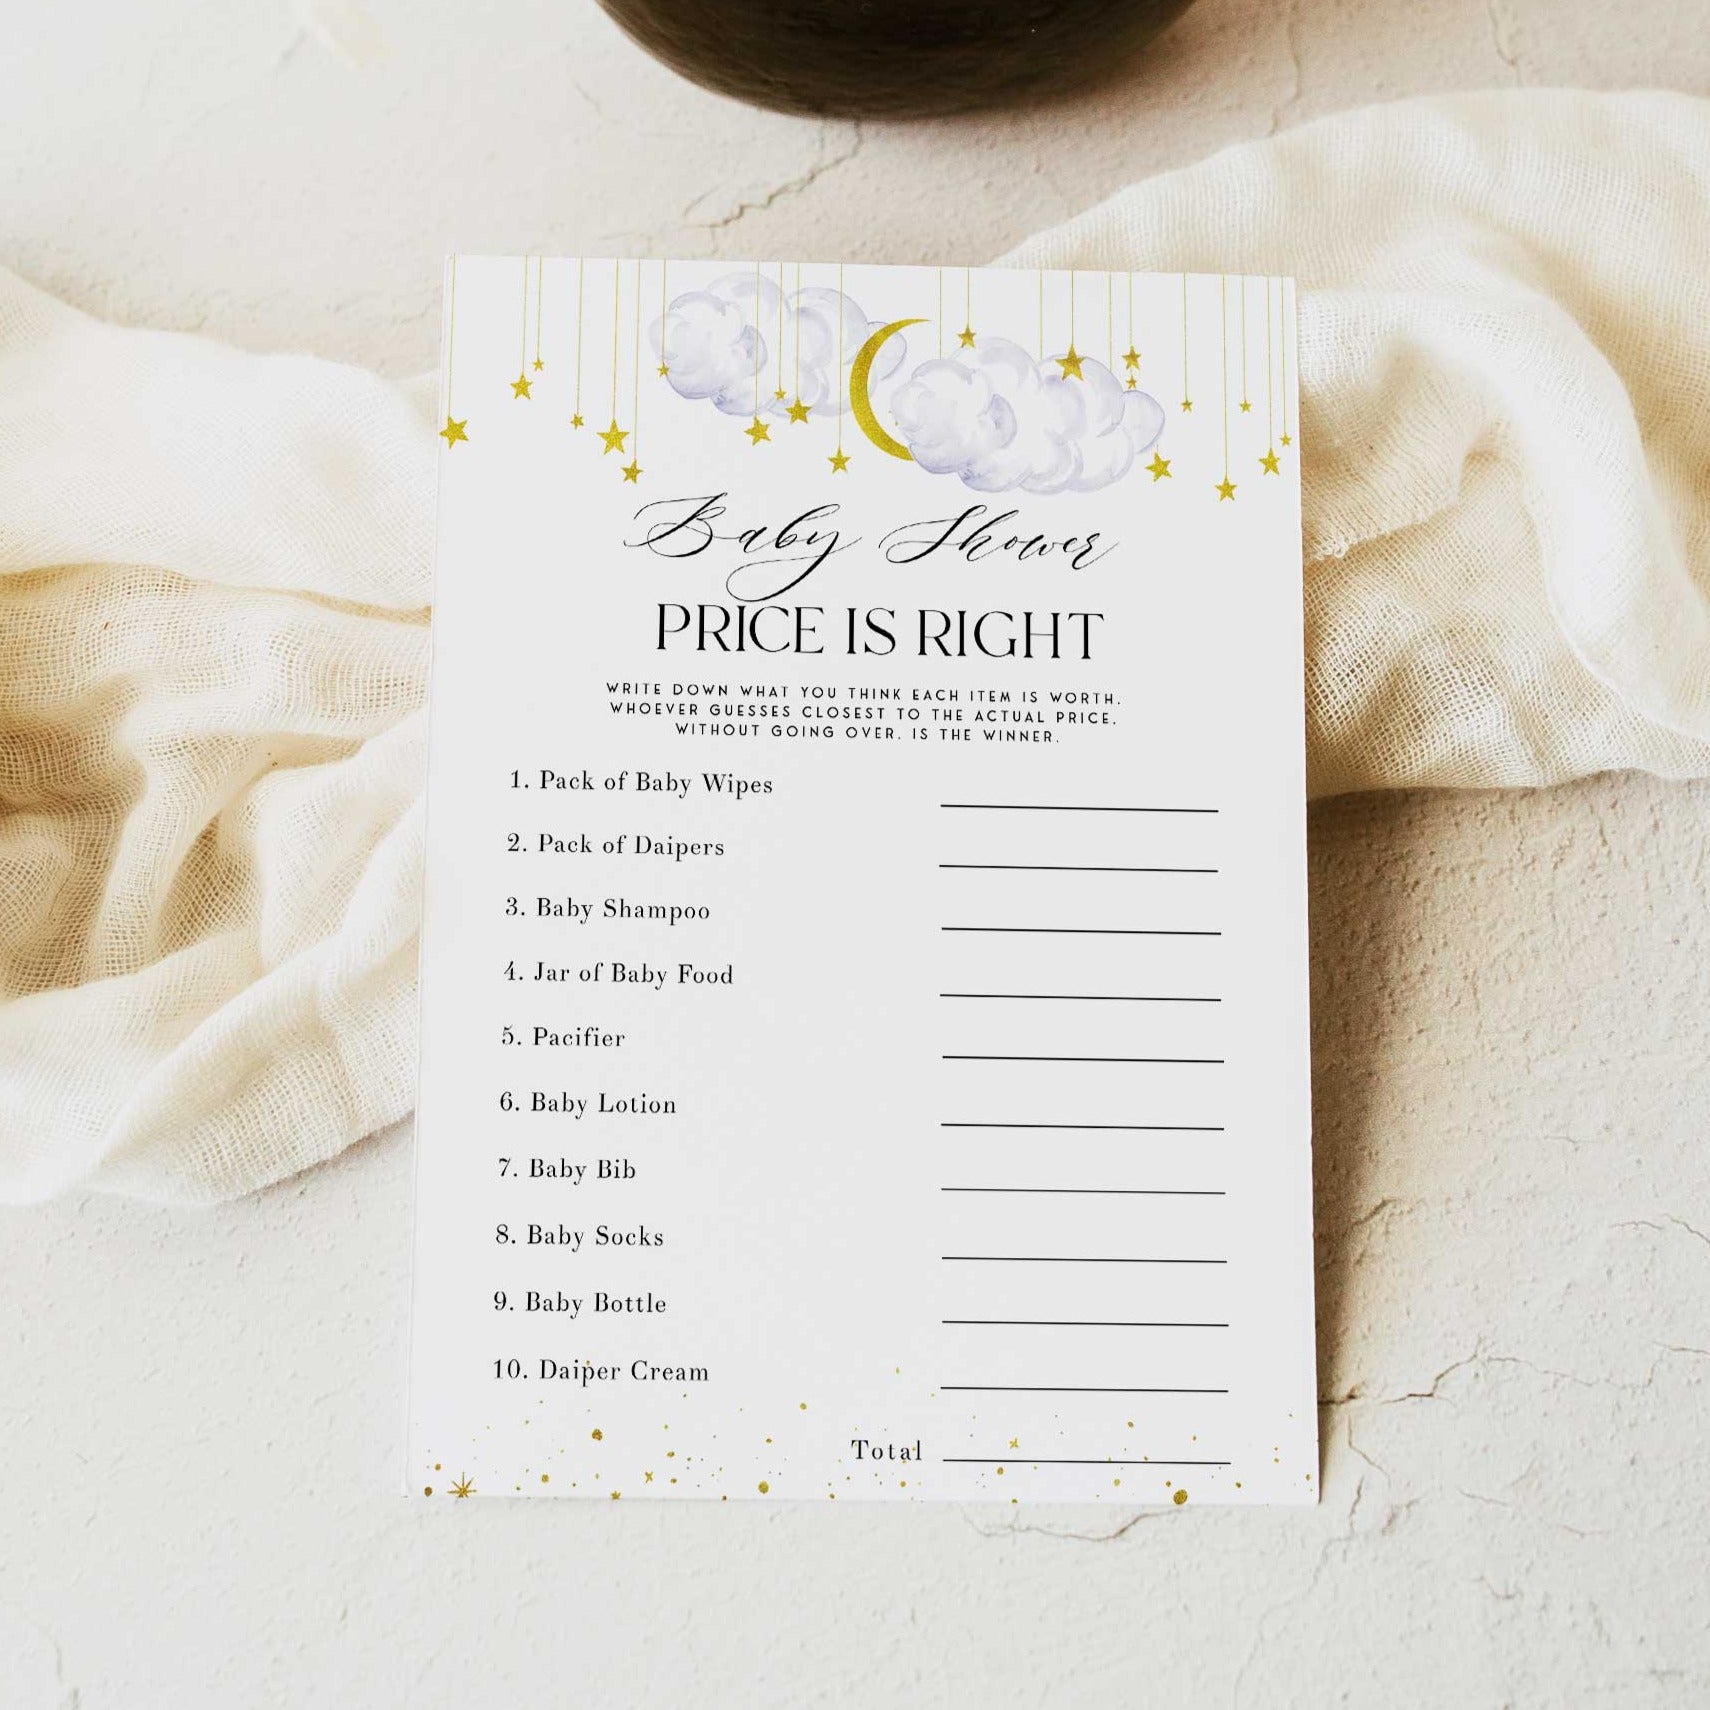 Fully editable and printable baby shower price is right game with a little star design. Perfect for a Twinkle Little Star baby shower themed party